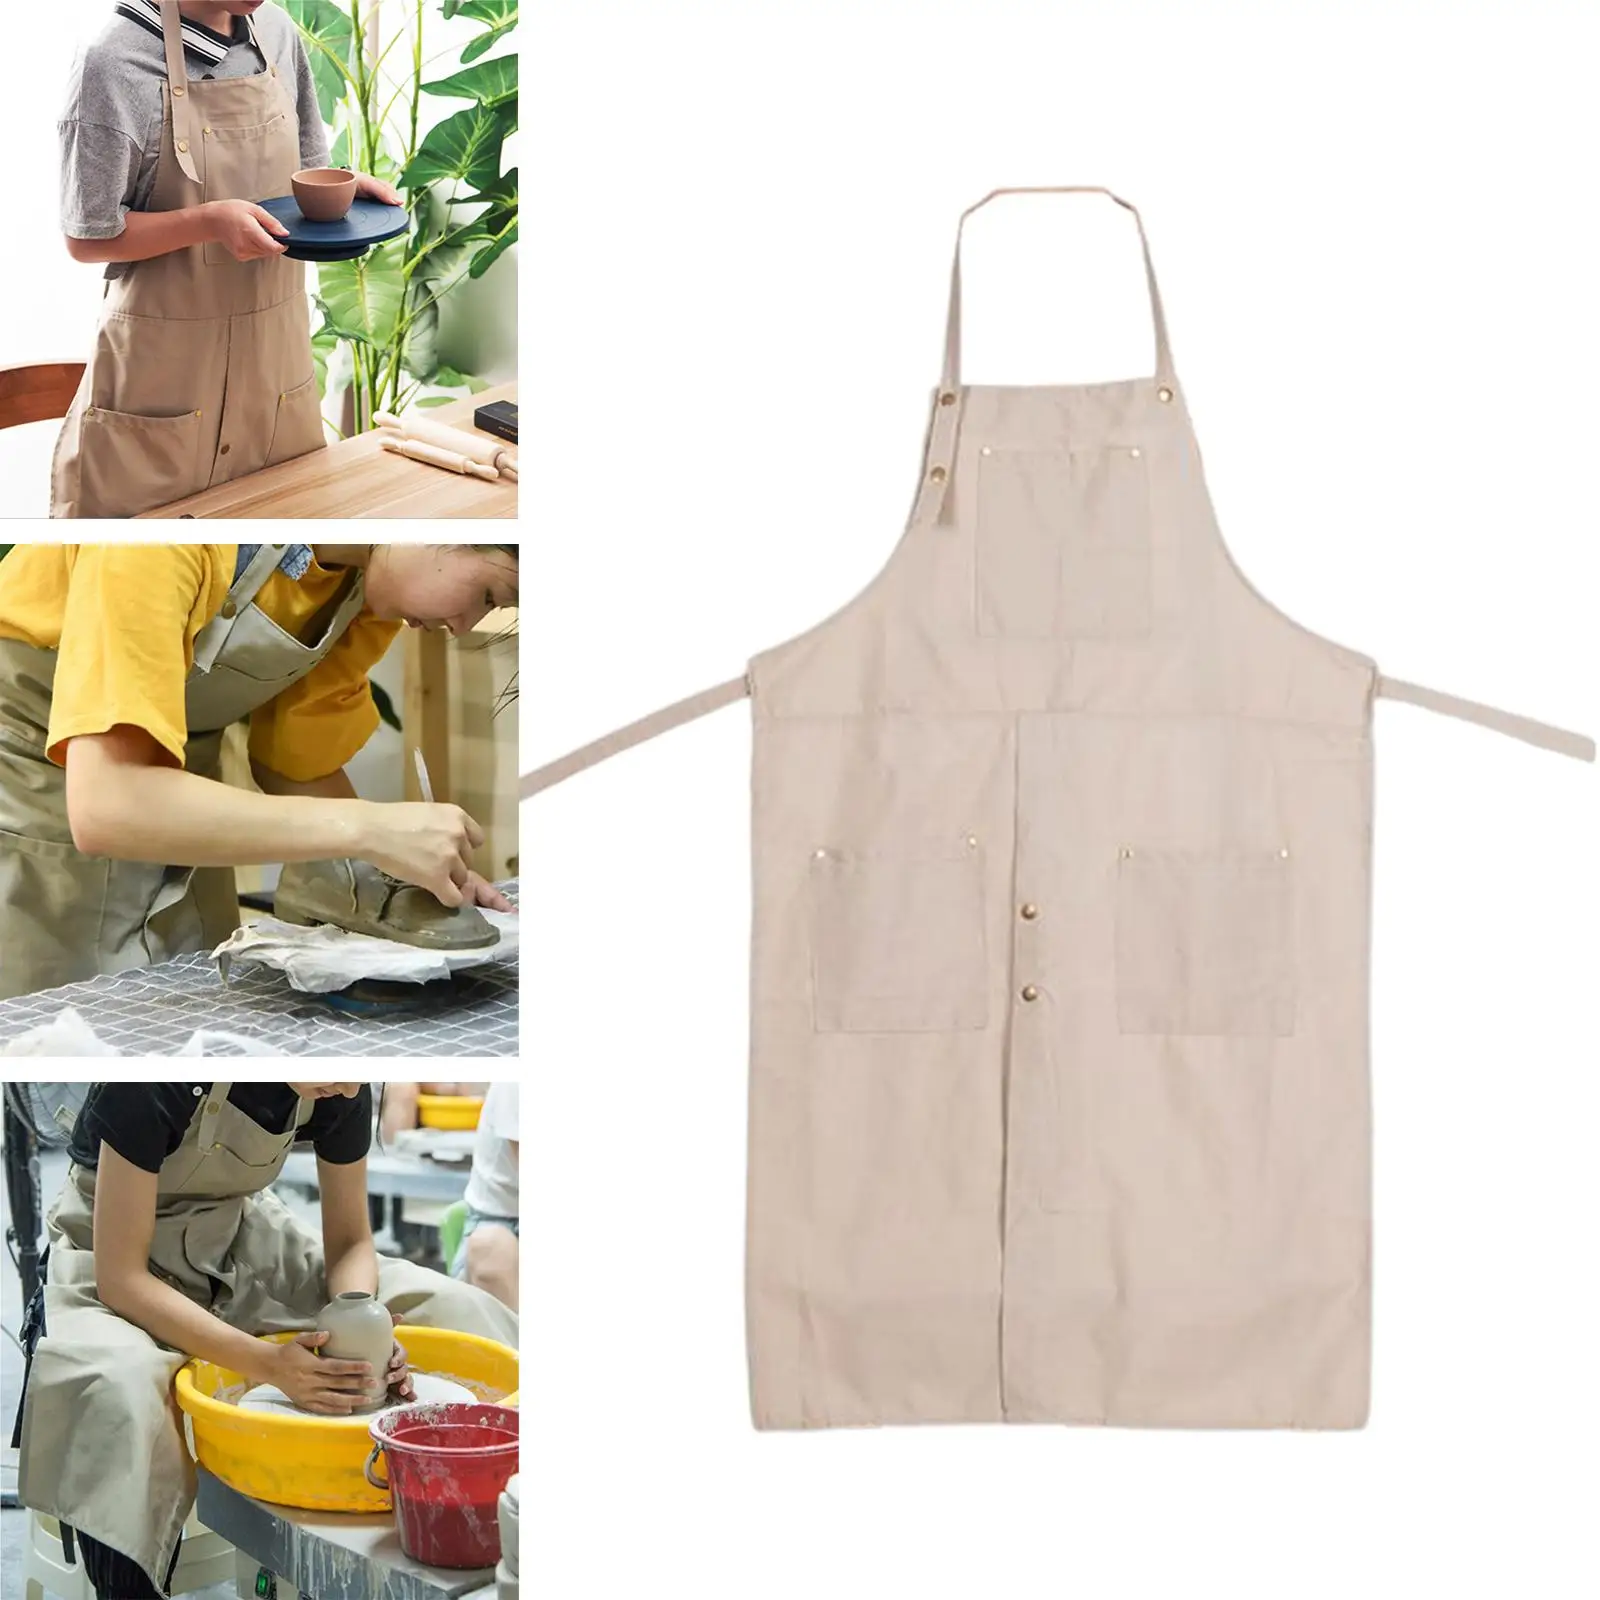 Professional Canvas Apron Aprons Uniform W/Pockets for Cooking Indoor Hair Cut